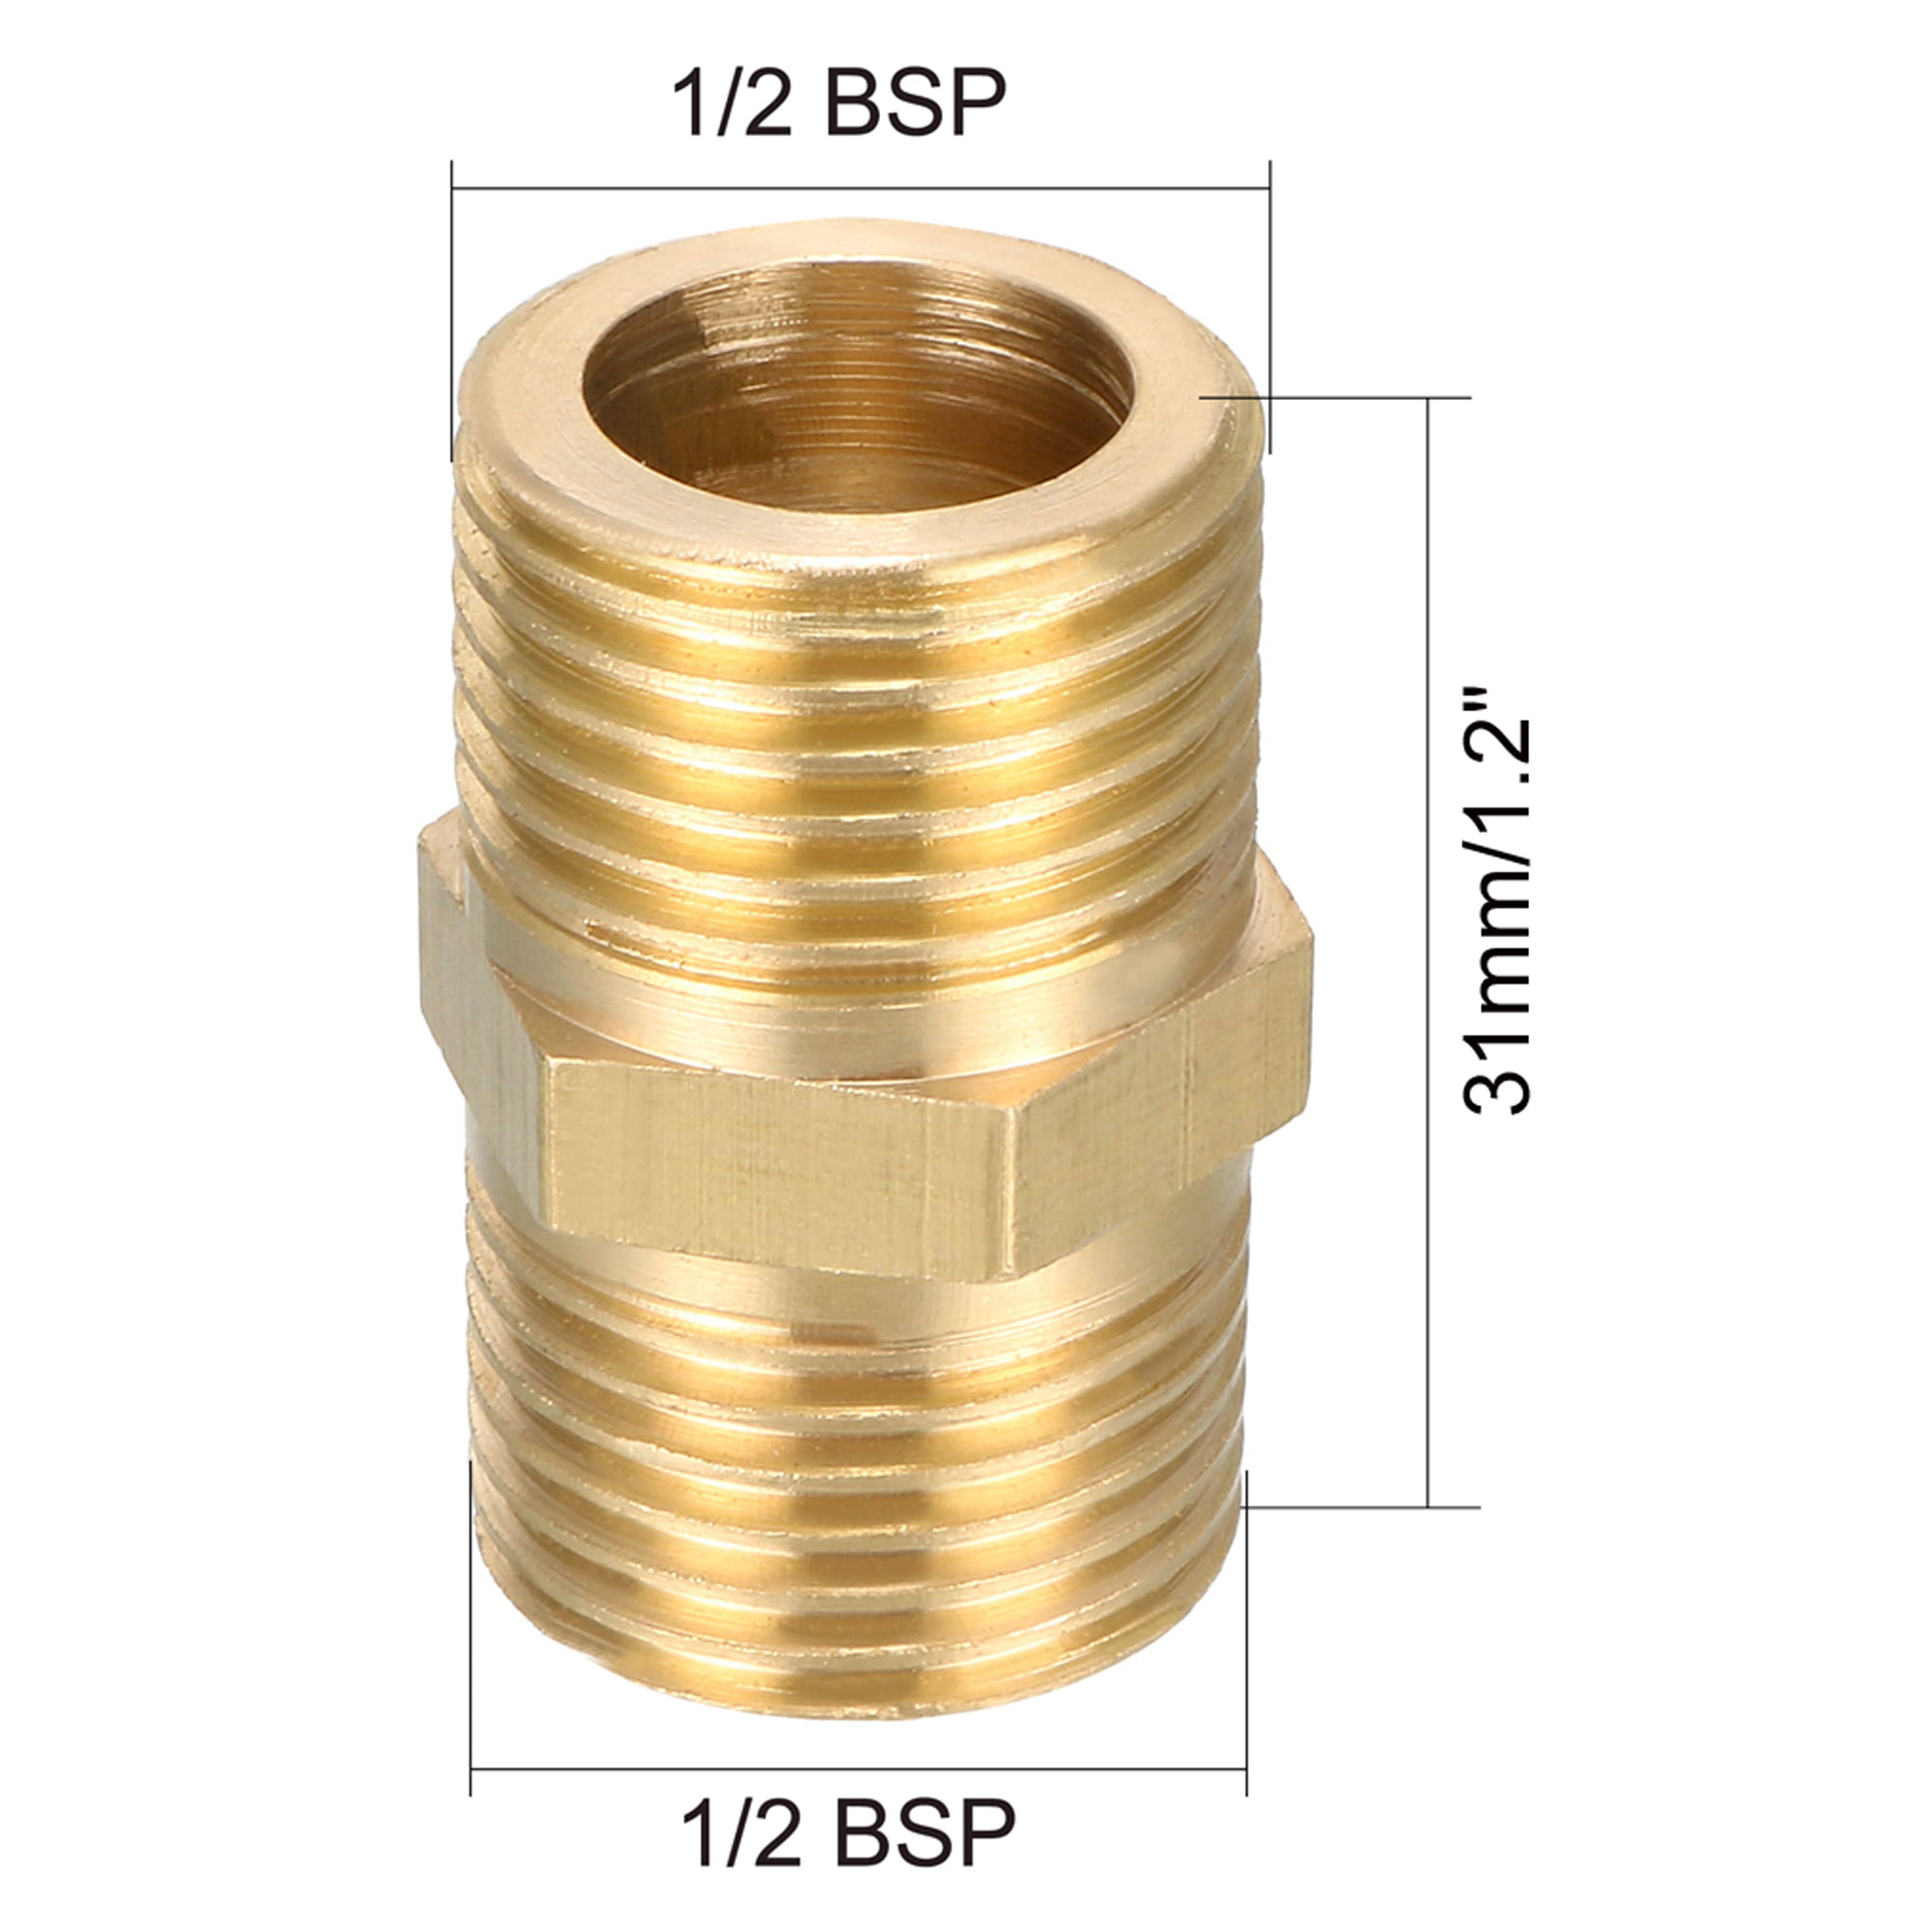 1/2BSP to 1/2BSP Male Thread Air Water Pipe Fitting Hex Nipple Brass Tone 5pcs 